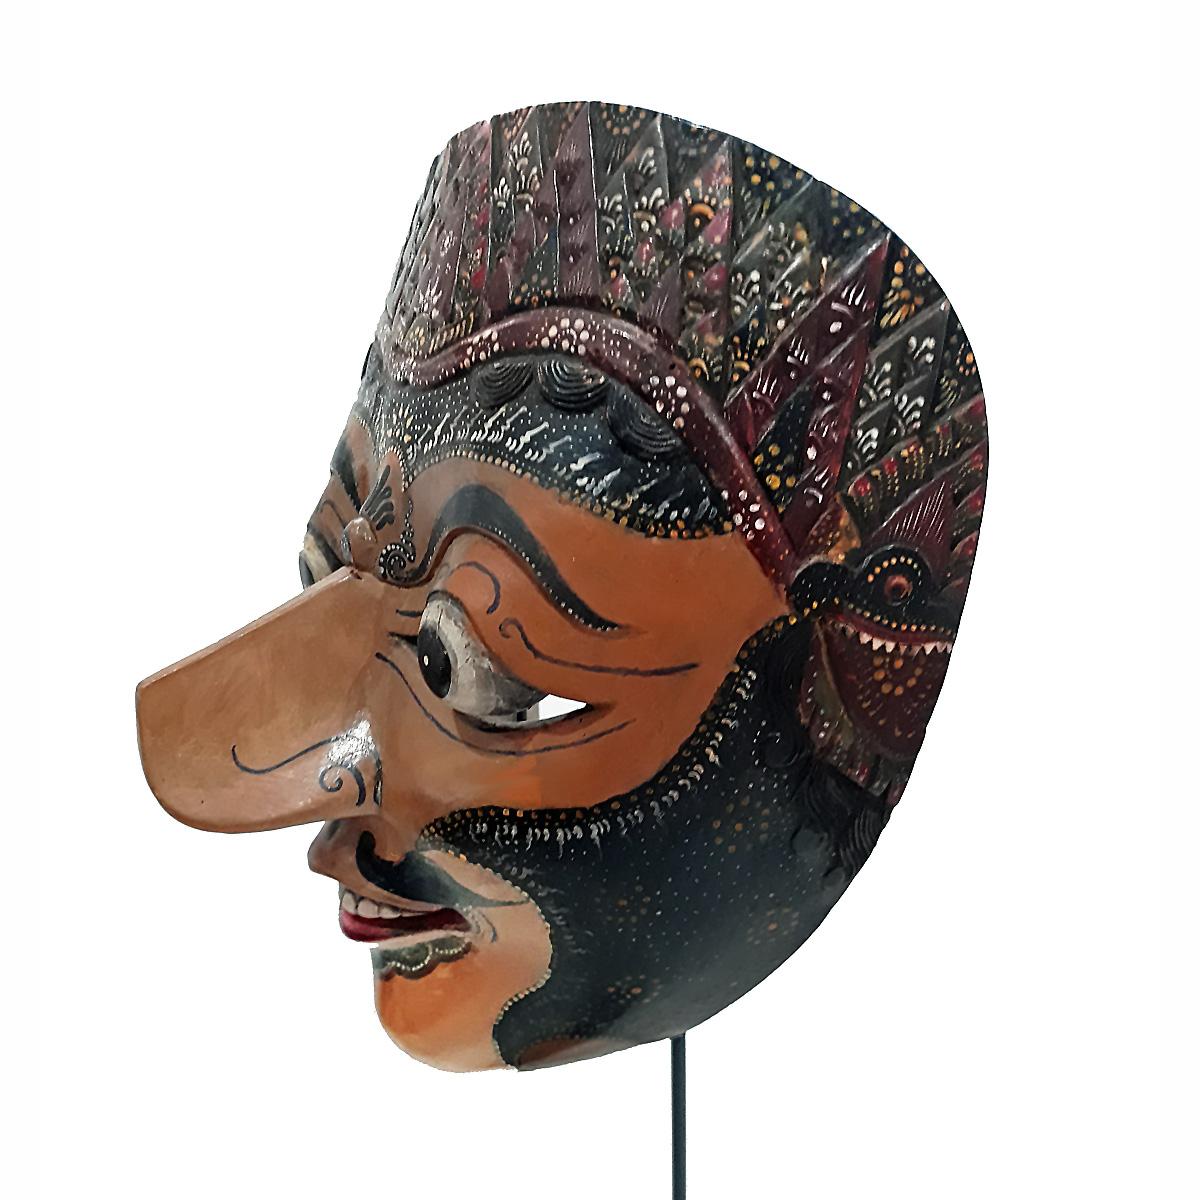 indonesian traditional mask